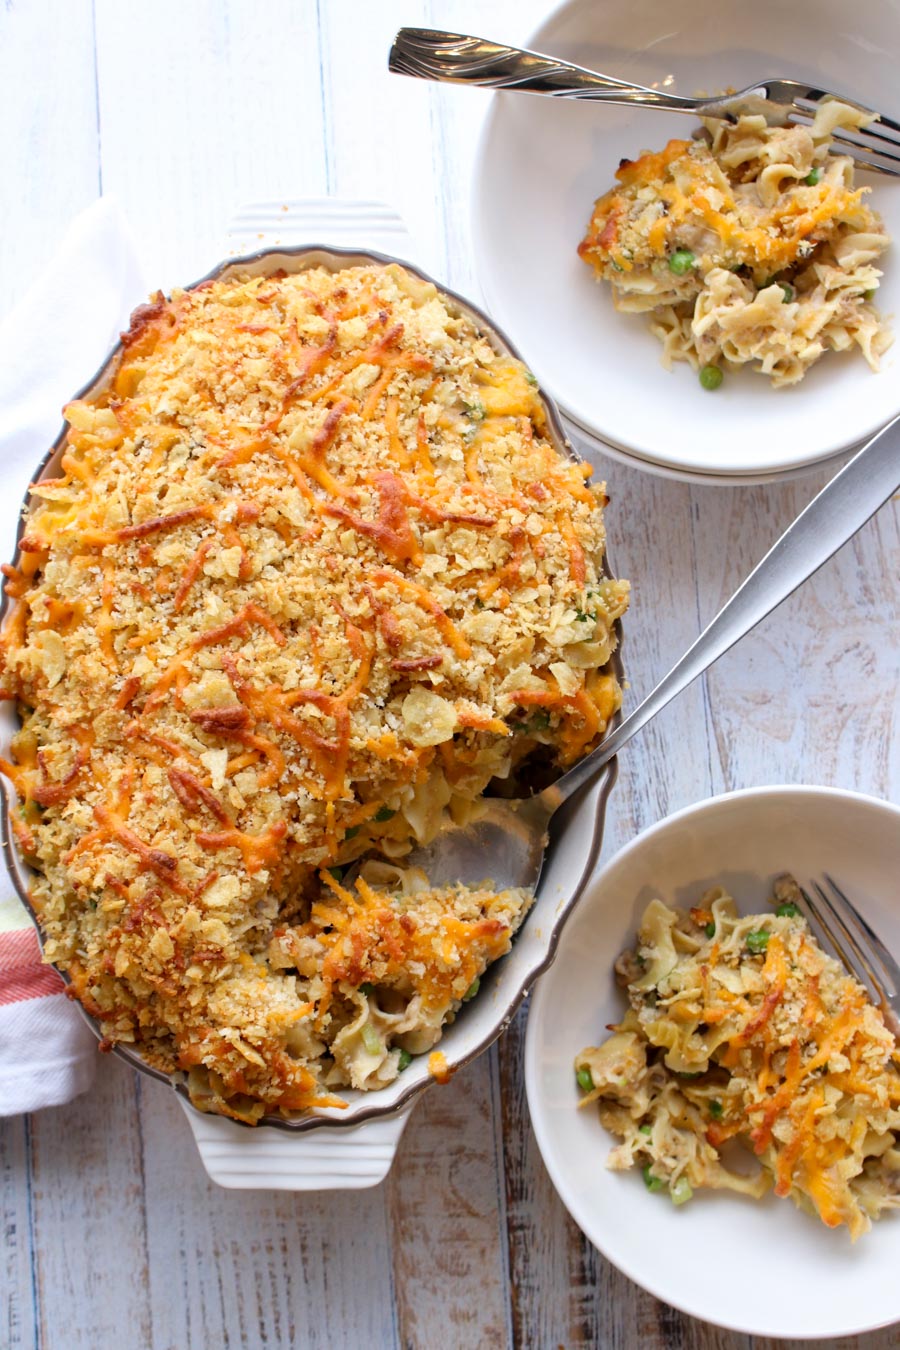 Tuna casserole with two servings